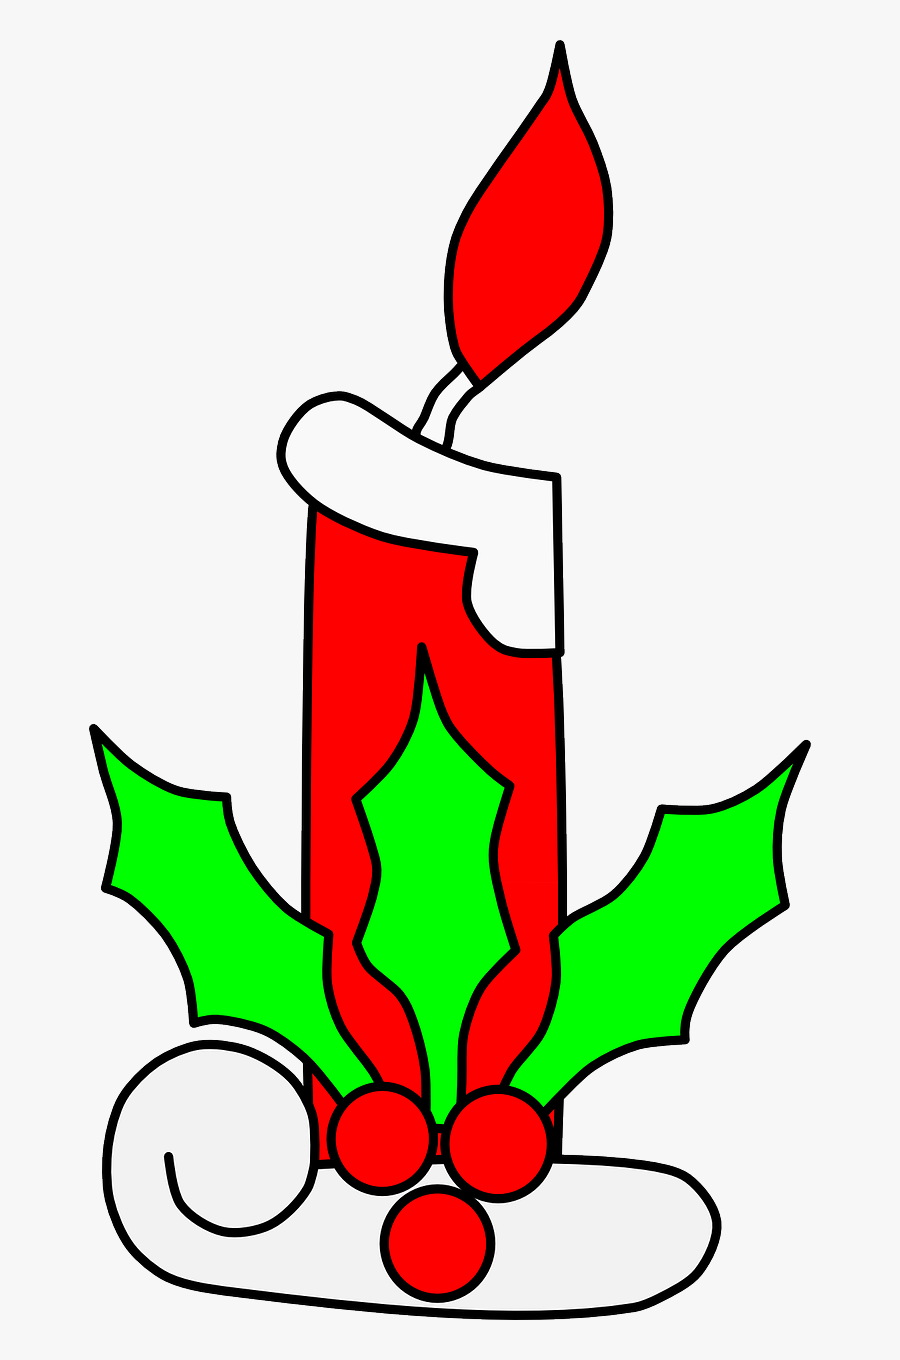 Candle Christmas Light Leaves Png Image - Cartoon Images Of Christmas Candles, Transparent Clipart